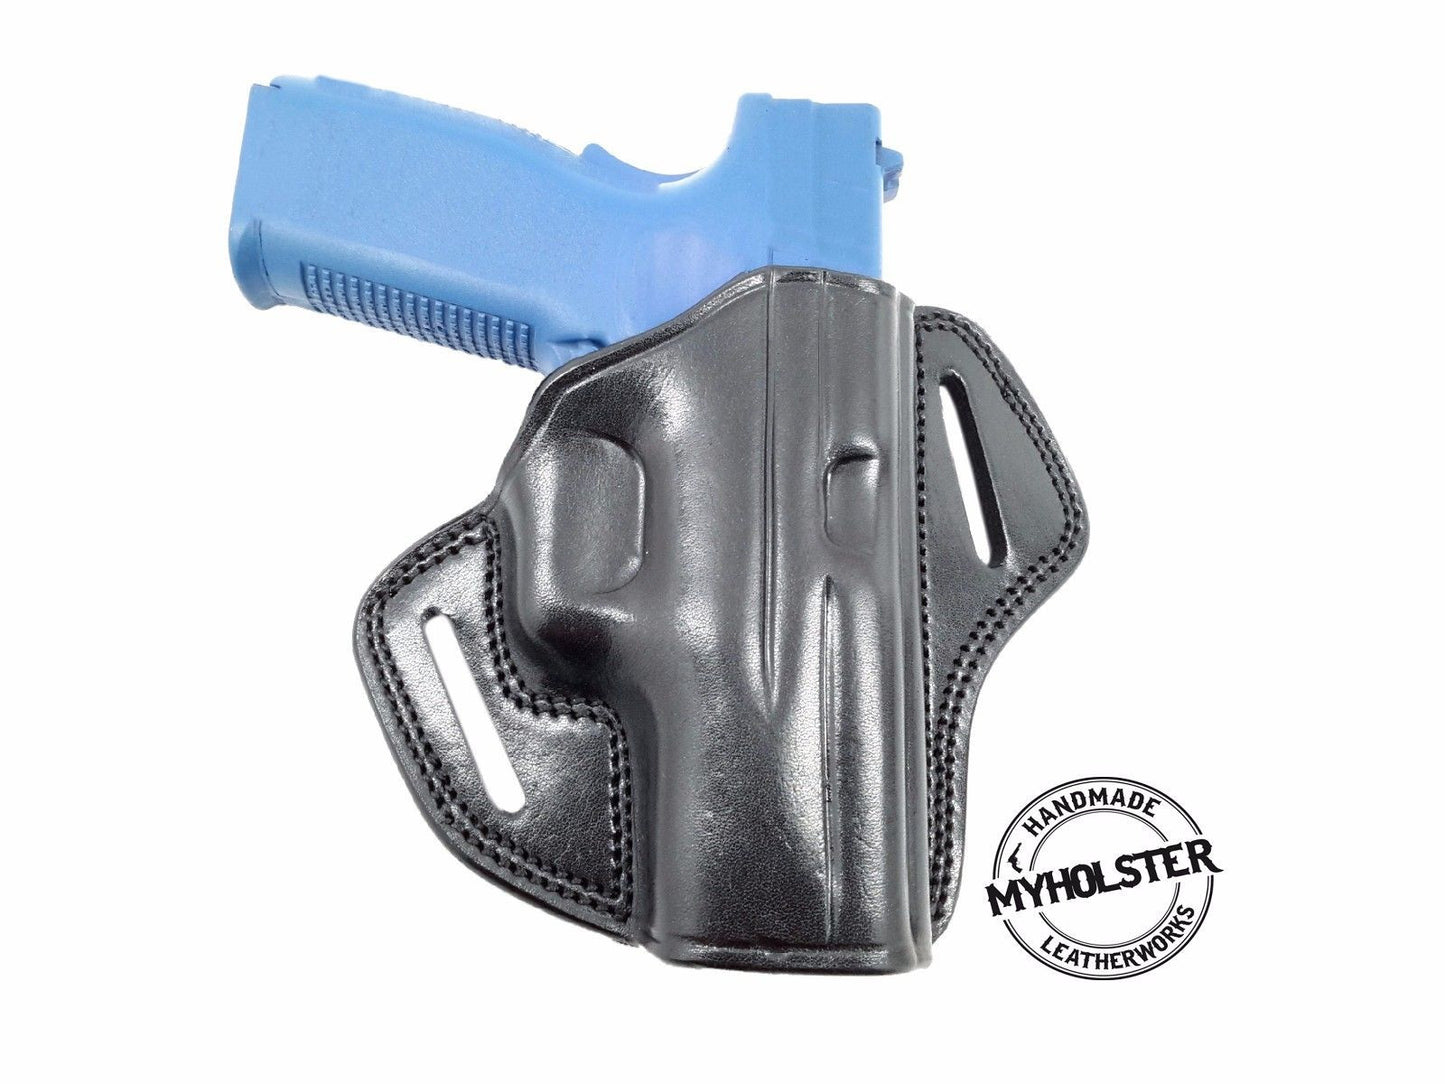 Beretta Px4 Storm Type Full Size .40 S&W Open Top Belt Holster Leather Holster